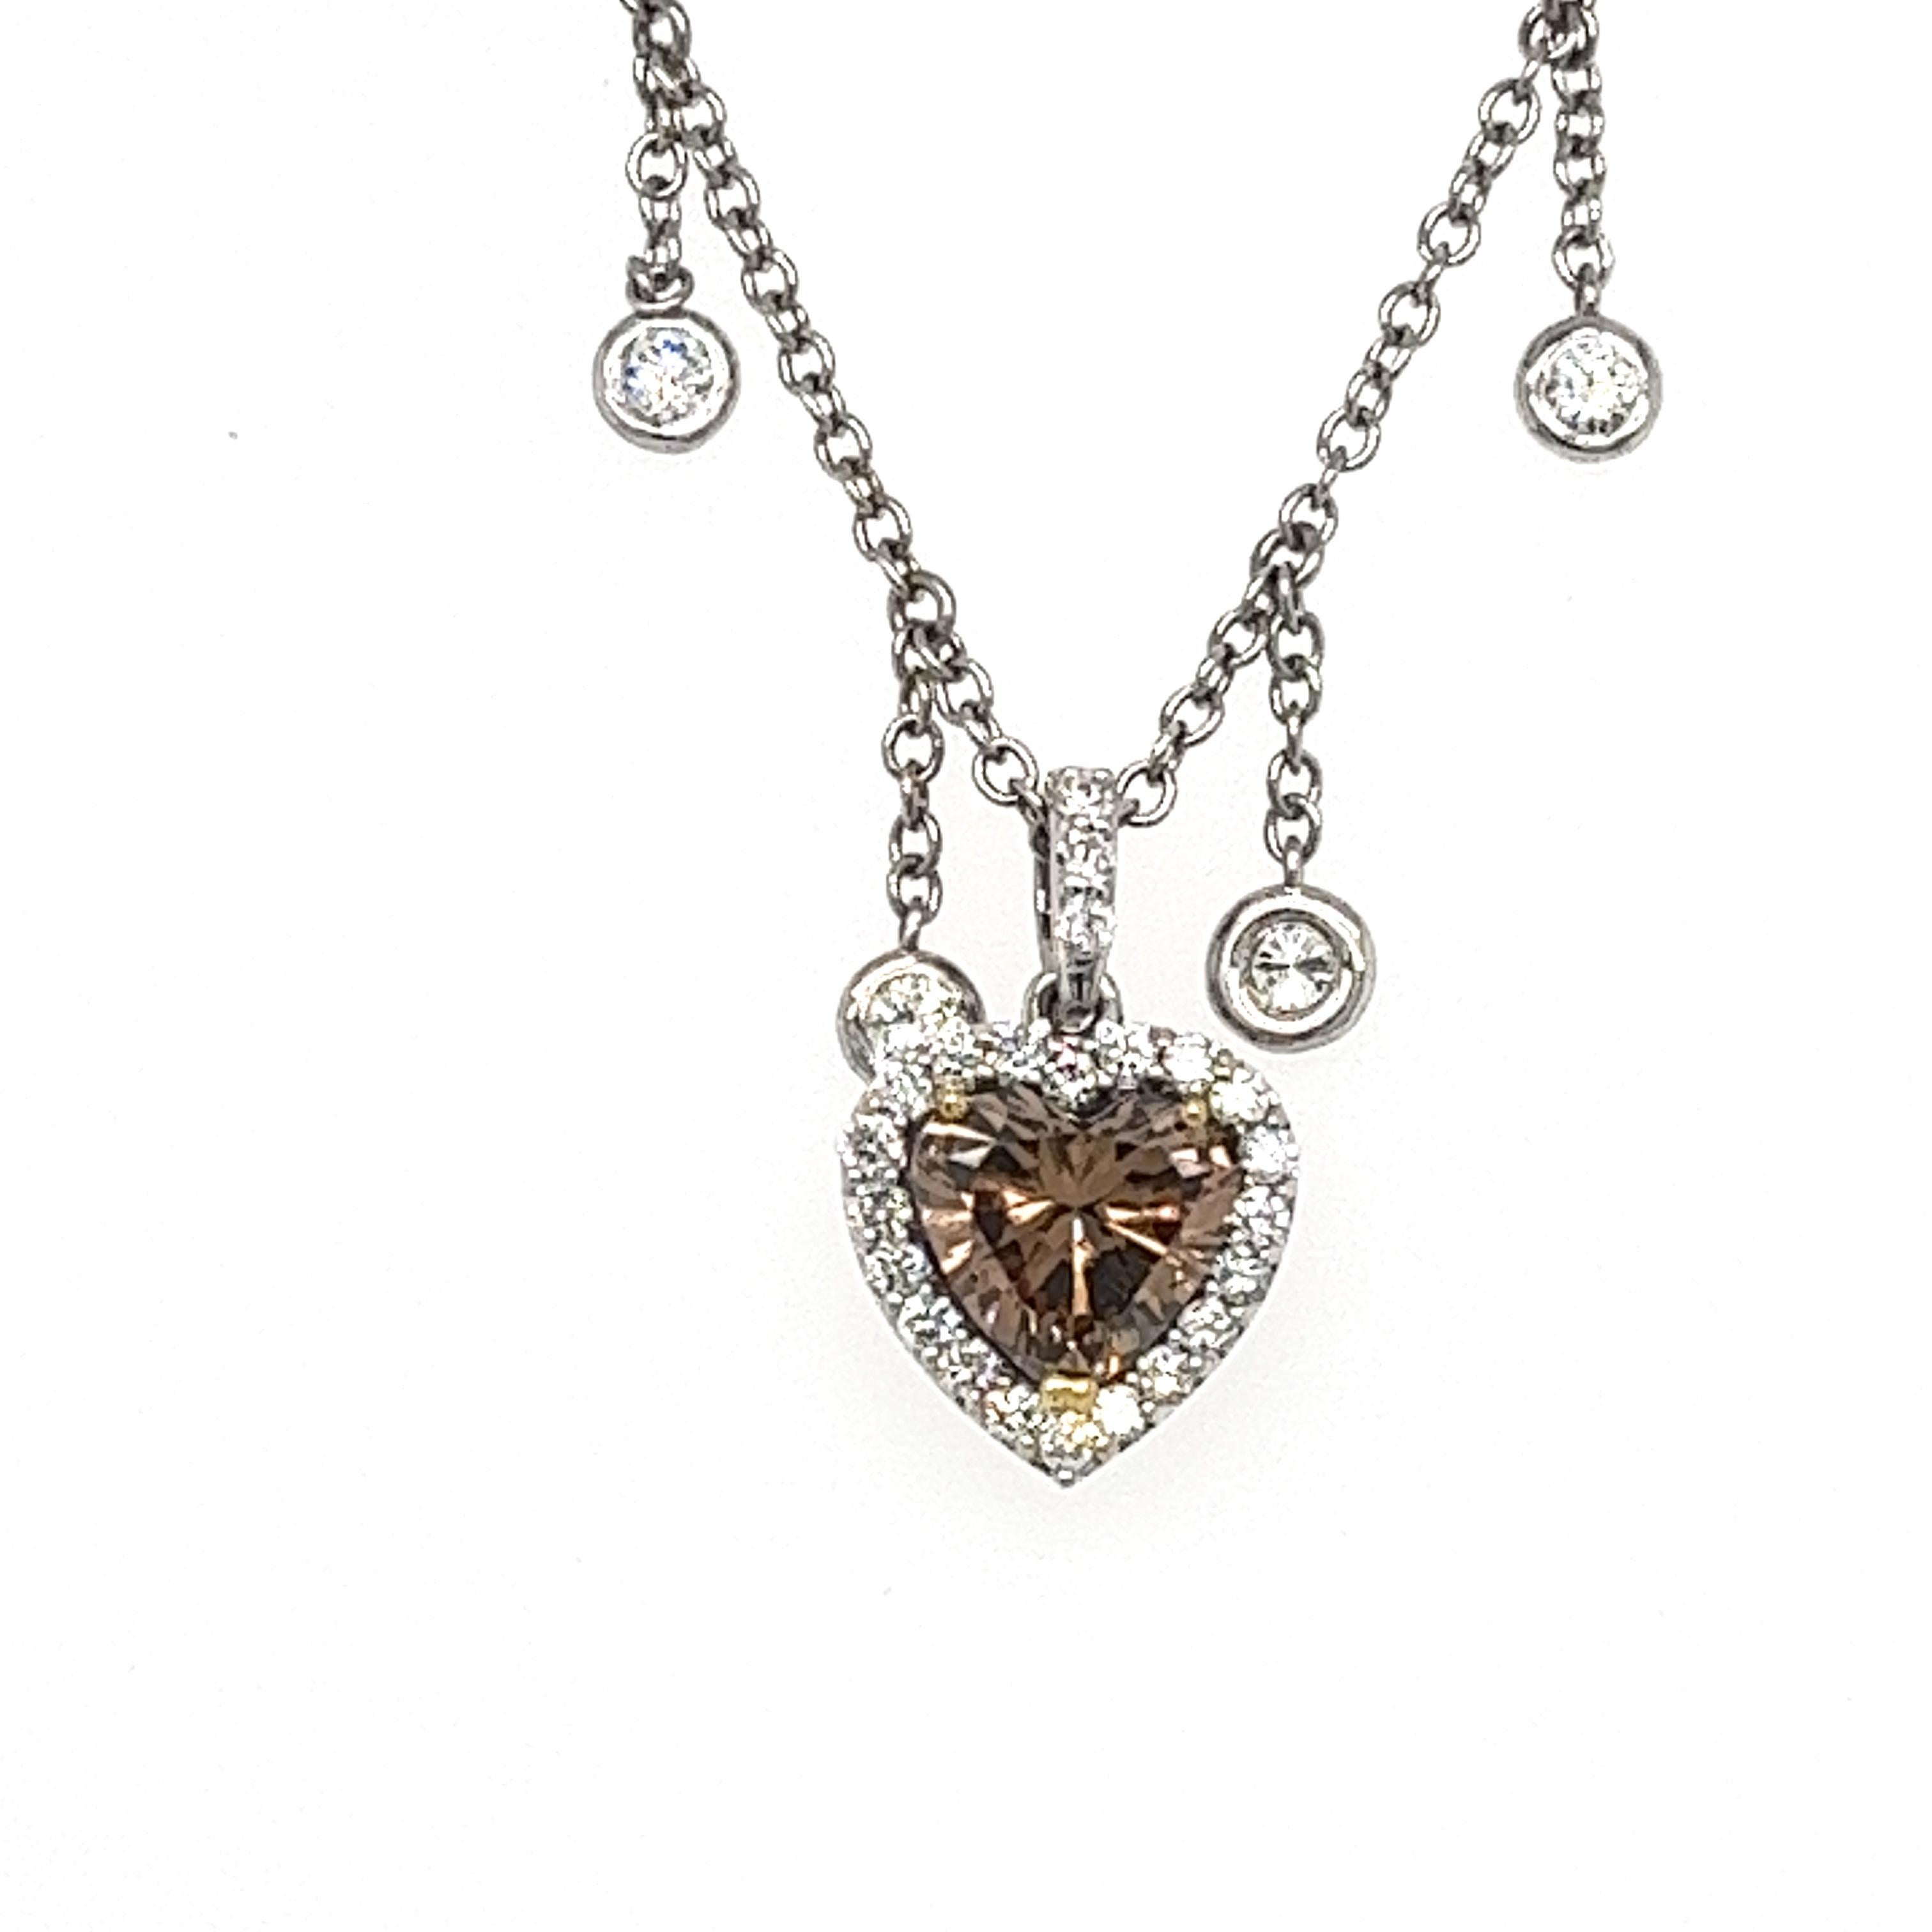 Heart Cut G.I.A. Diamond Heart Pendant on Diamond by the Yard Chain in 18kt Gold